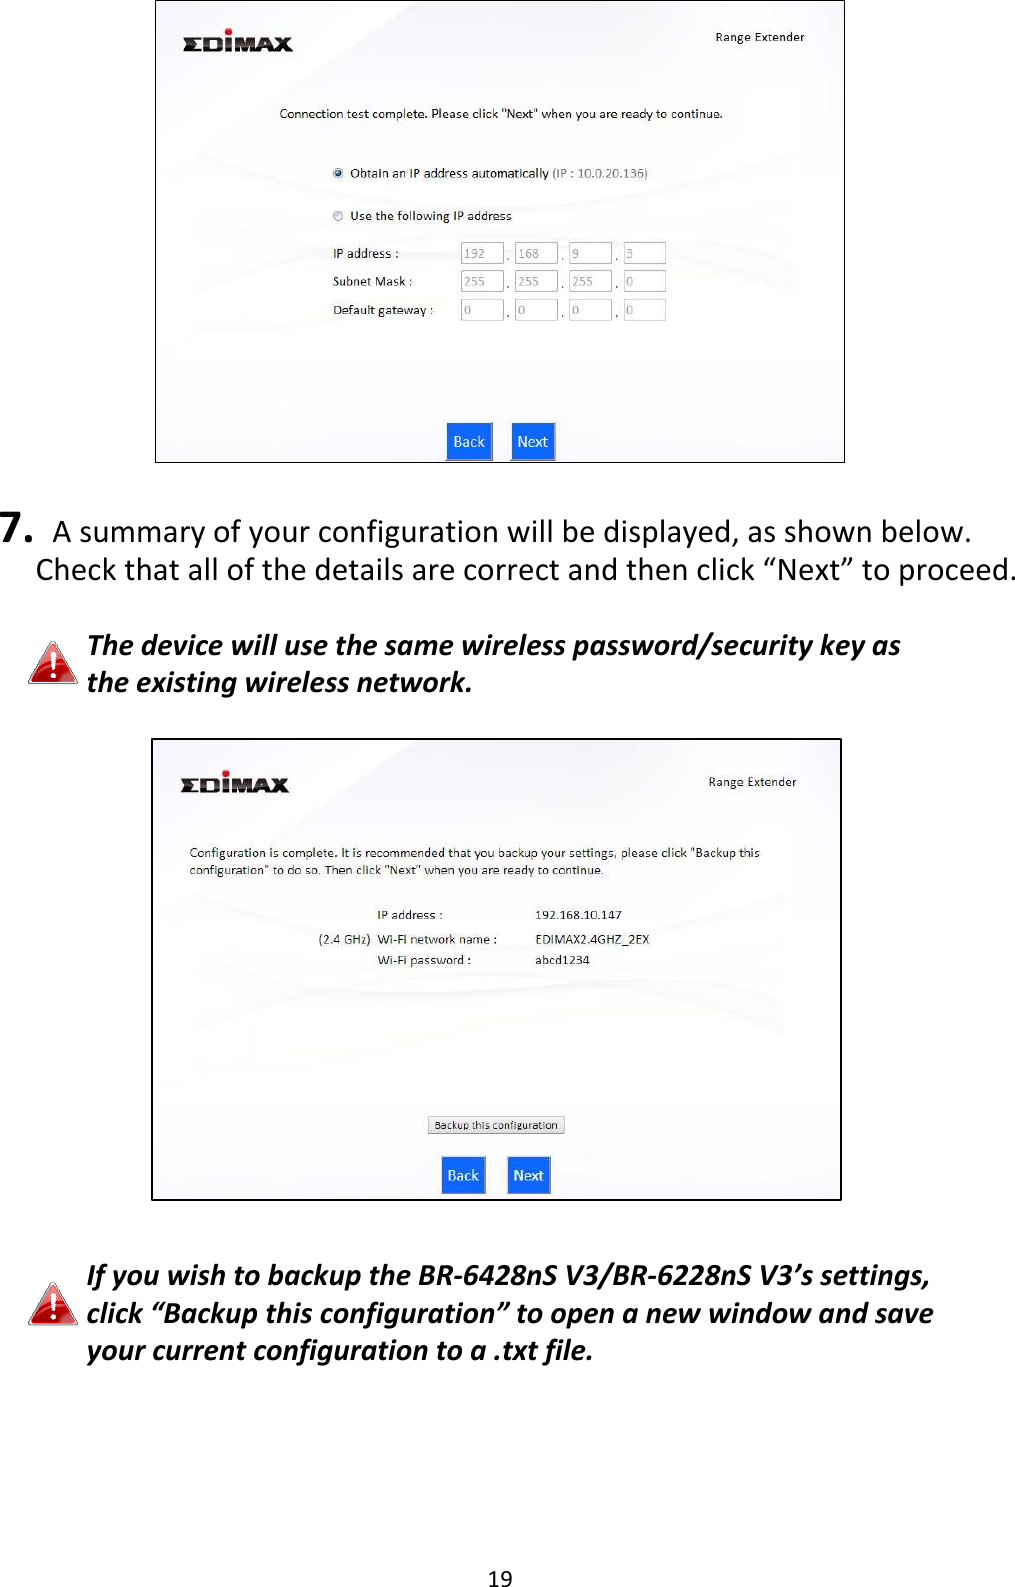 19   7.   A summary of your configuration will be displayed, as shown below.     Check that all of the details are correct and then click “Next” to proceed.  The device will use the same wireless password/security key as the existing wireless network.                If you wish to backup the BR-6428nS V3/BR-6228nS V3’s settings, click “Backup this configuration” to open a new window and save your current configuration to a .txt file.  